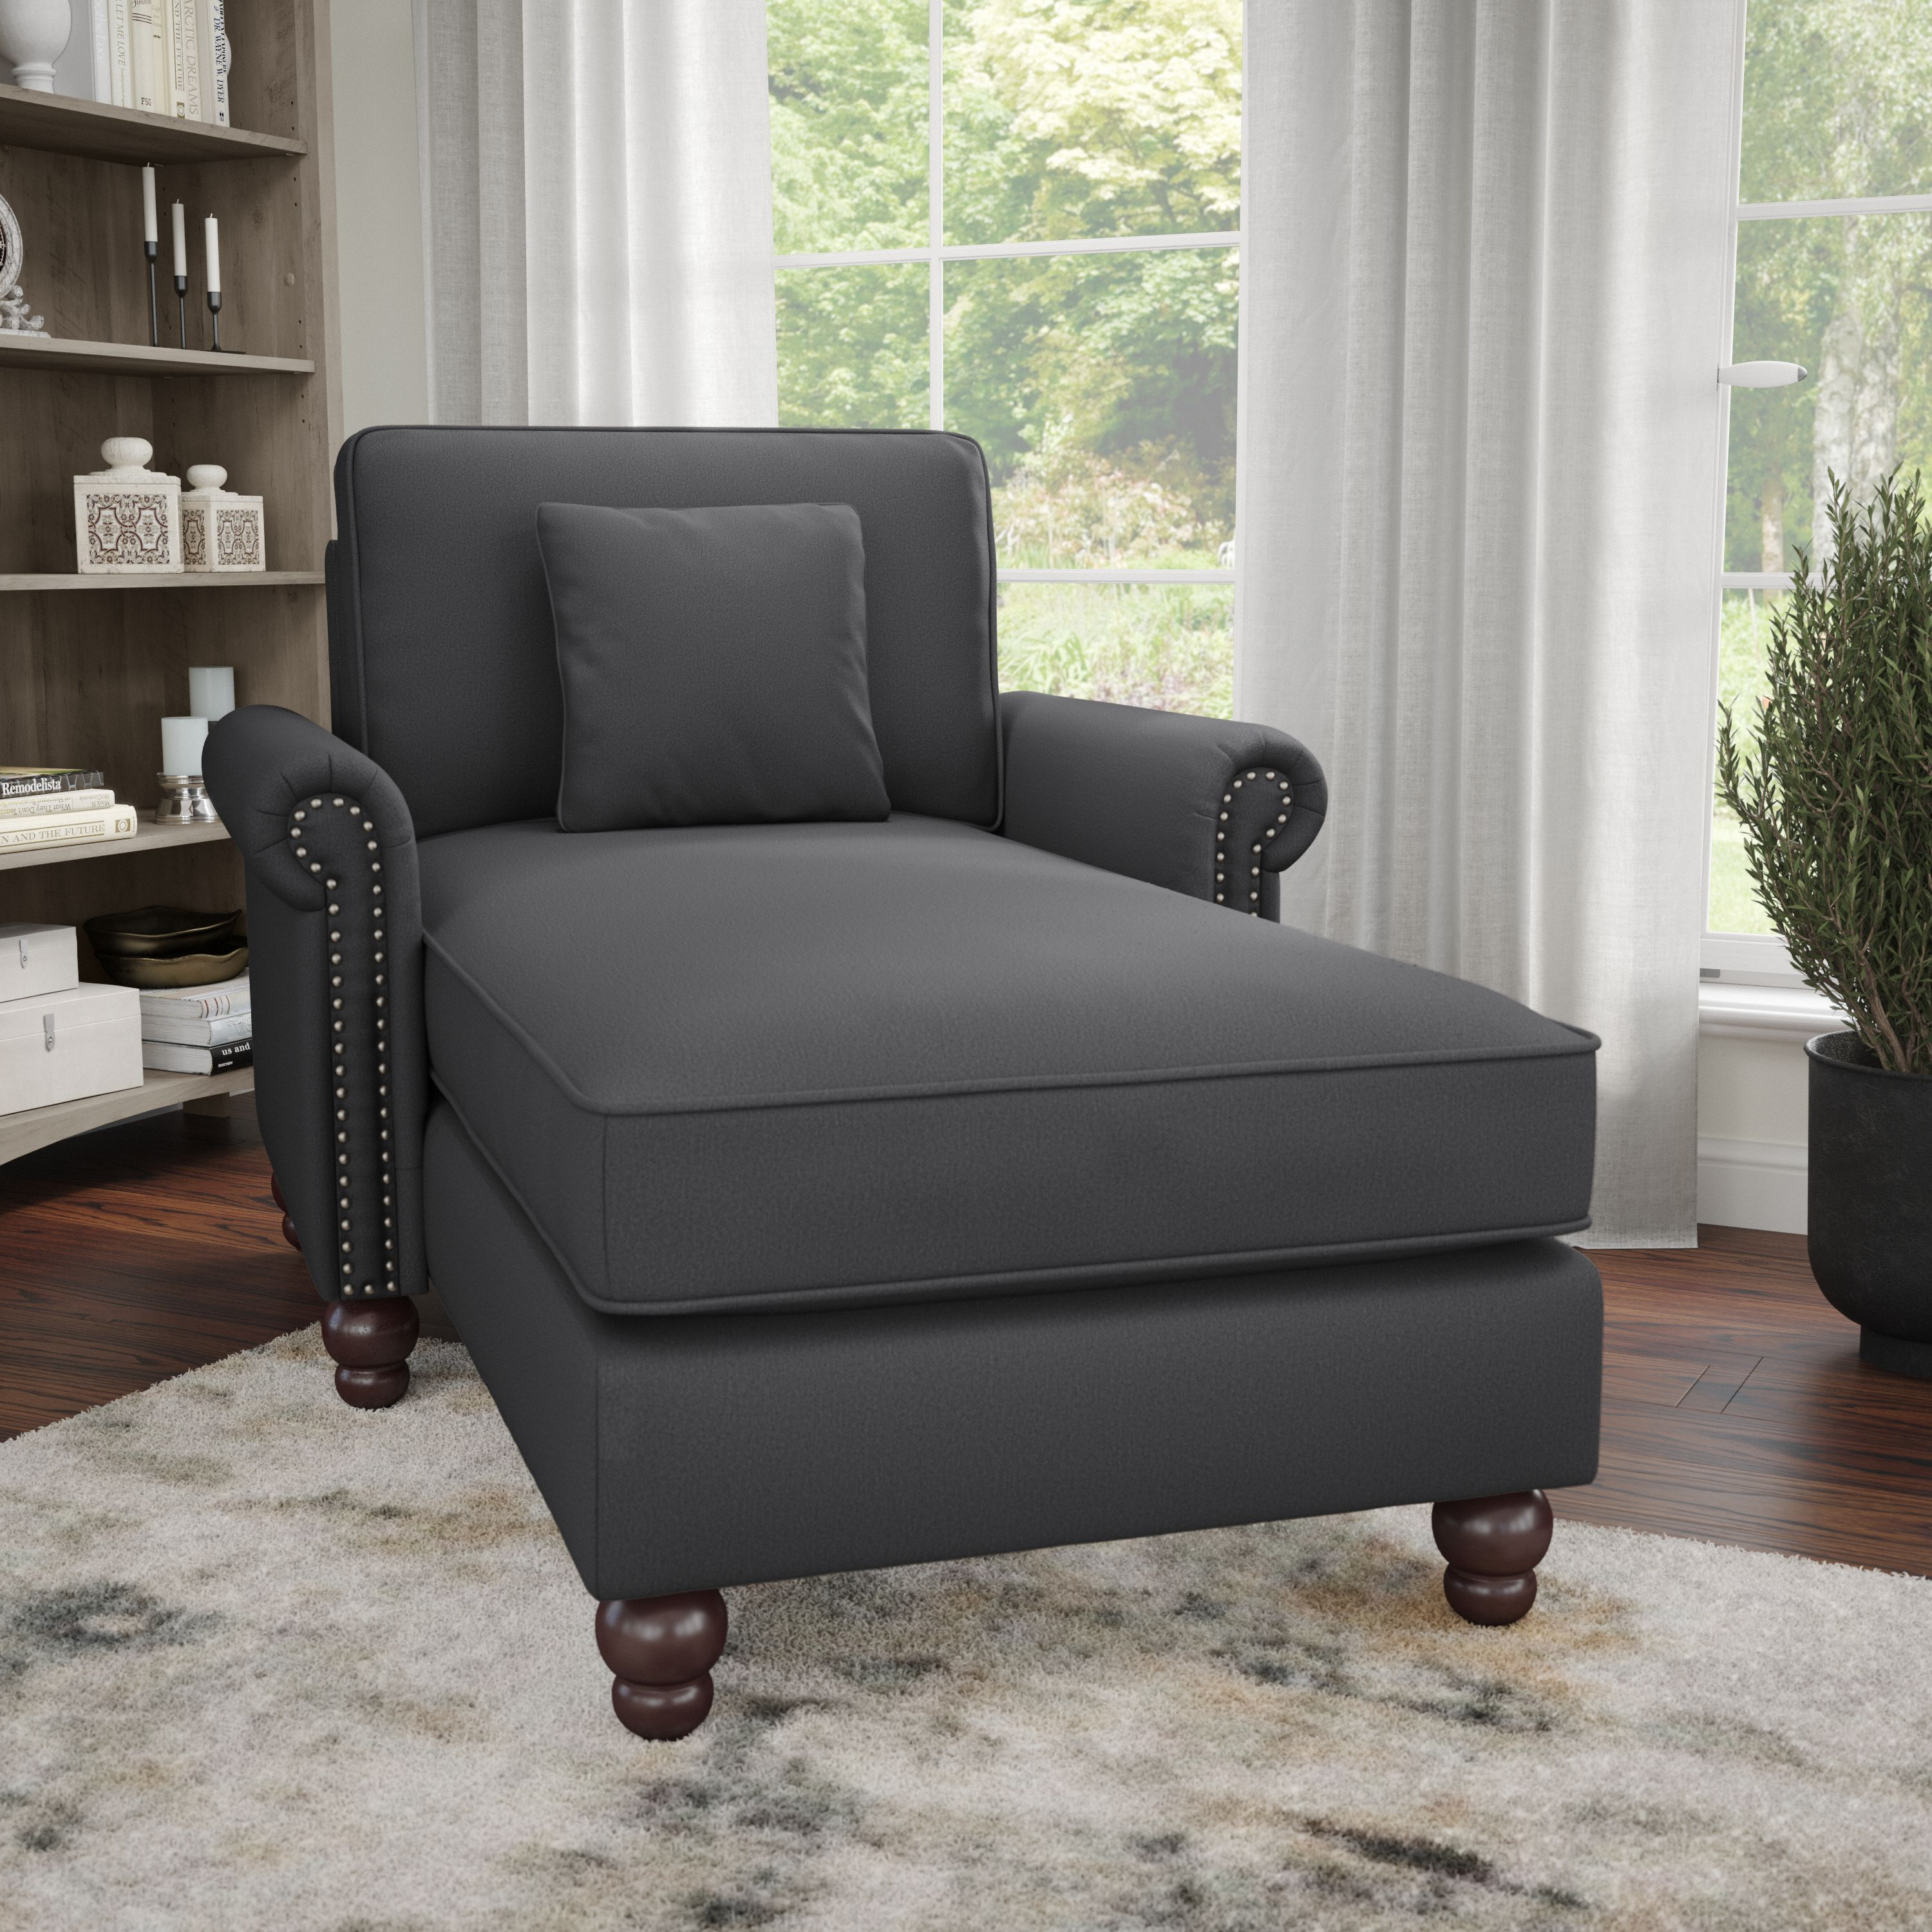 Shop Bush Furniture Coventry Chaise Lounge with Arms 01 CVM41BCGH-03K #color_charcoal gray herringbone fabr